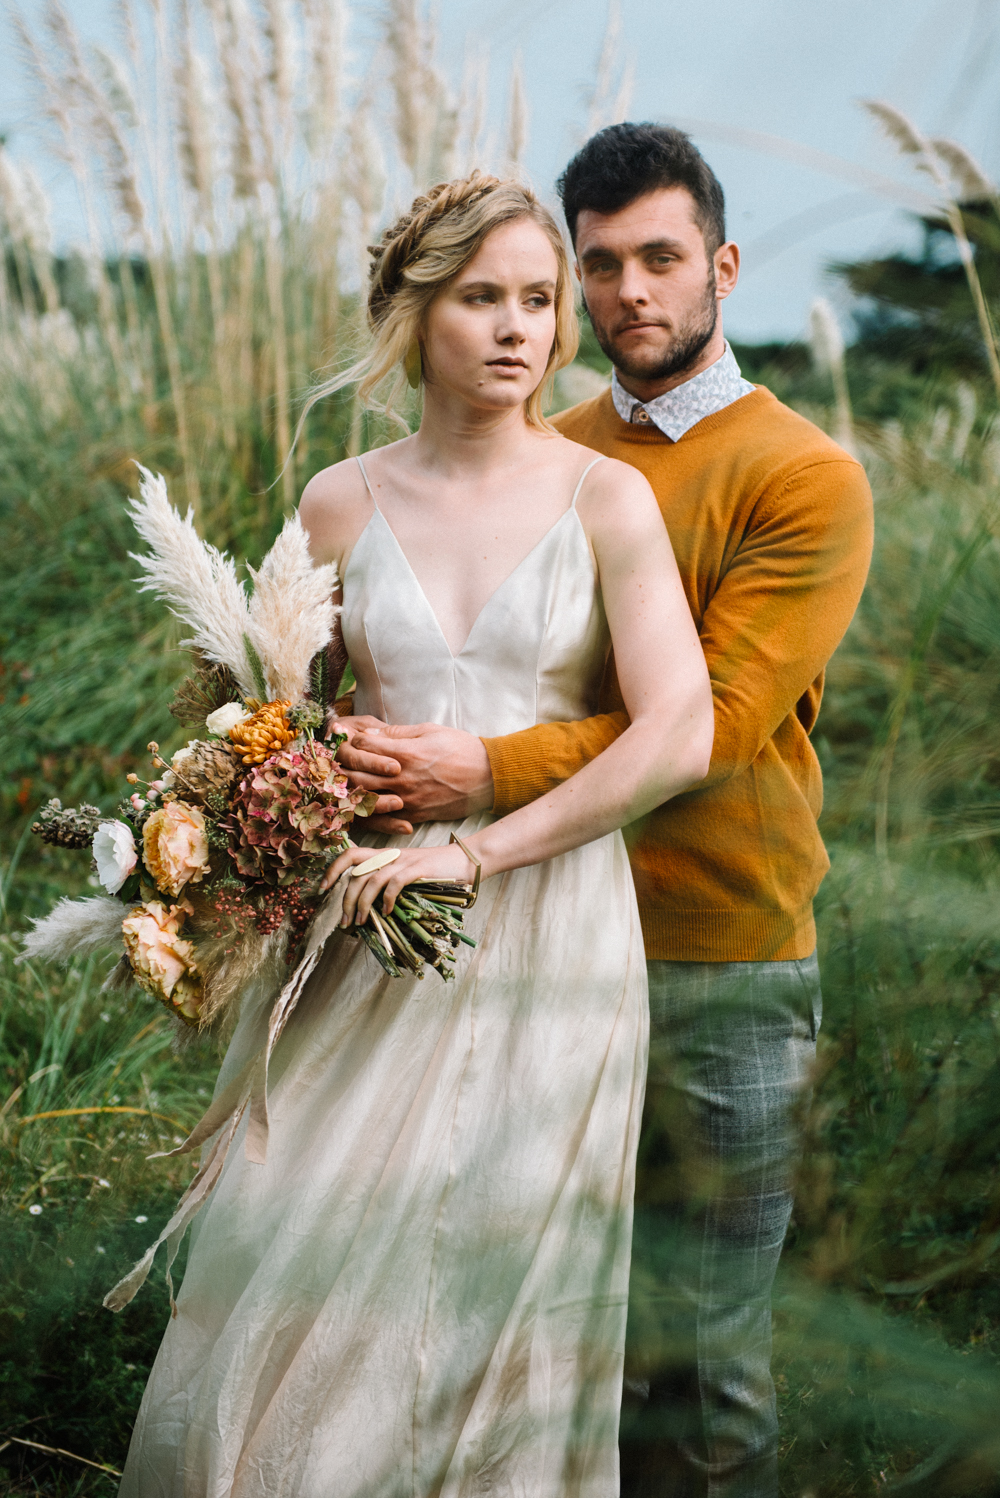 The bride was wearing a spaghetti strap silk wedding dress, the groom was wearing a mustard sweater and grey printed pants